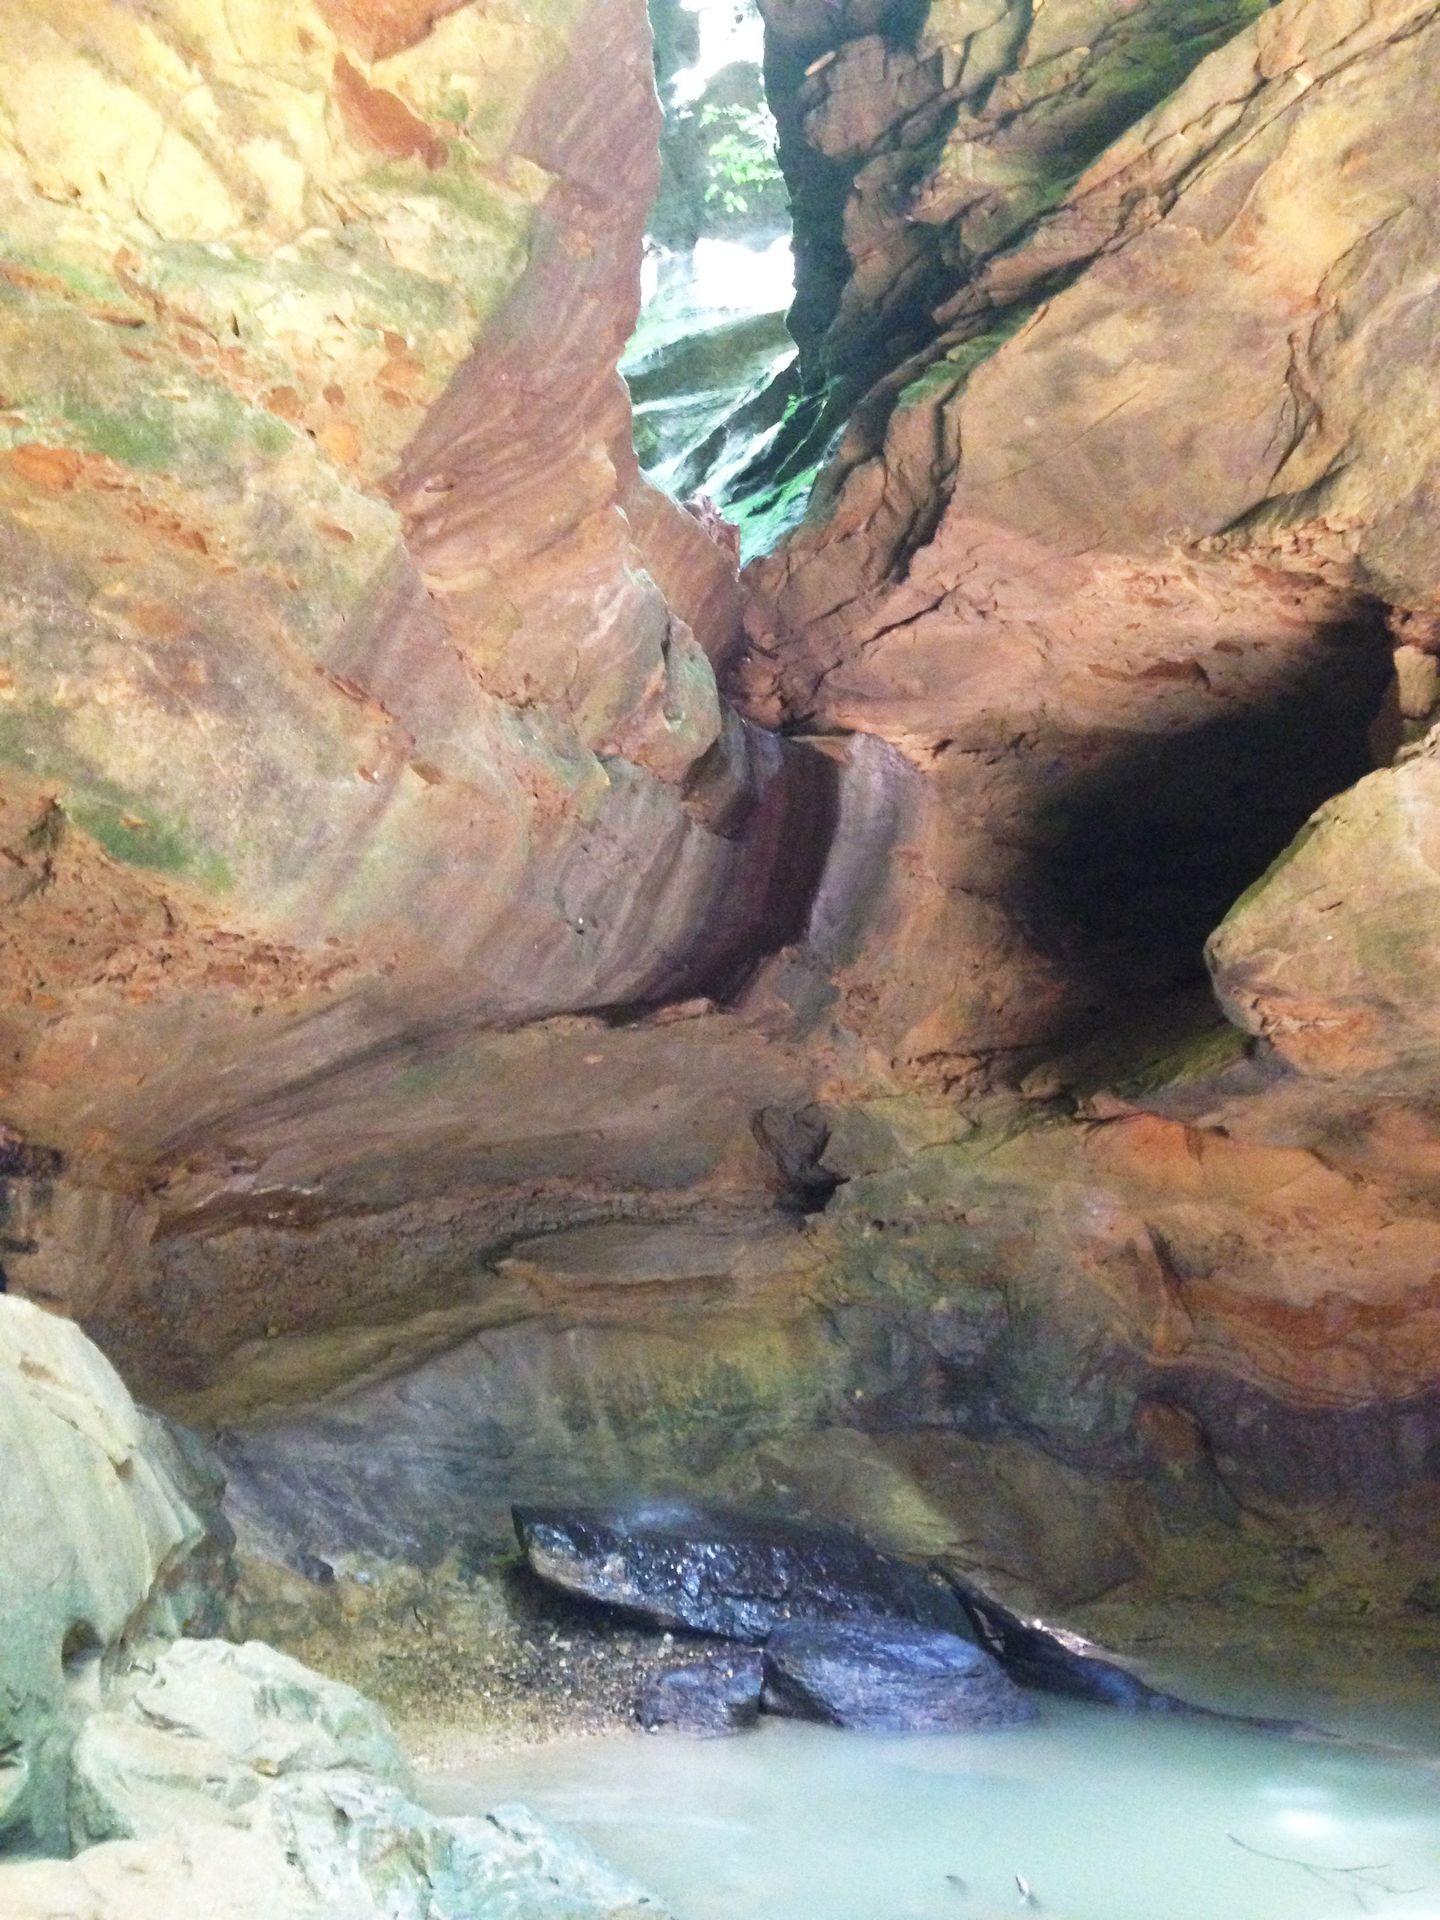 A grotto area of rock face on the Conkle's Hollow trail